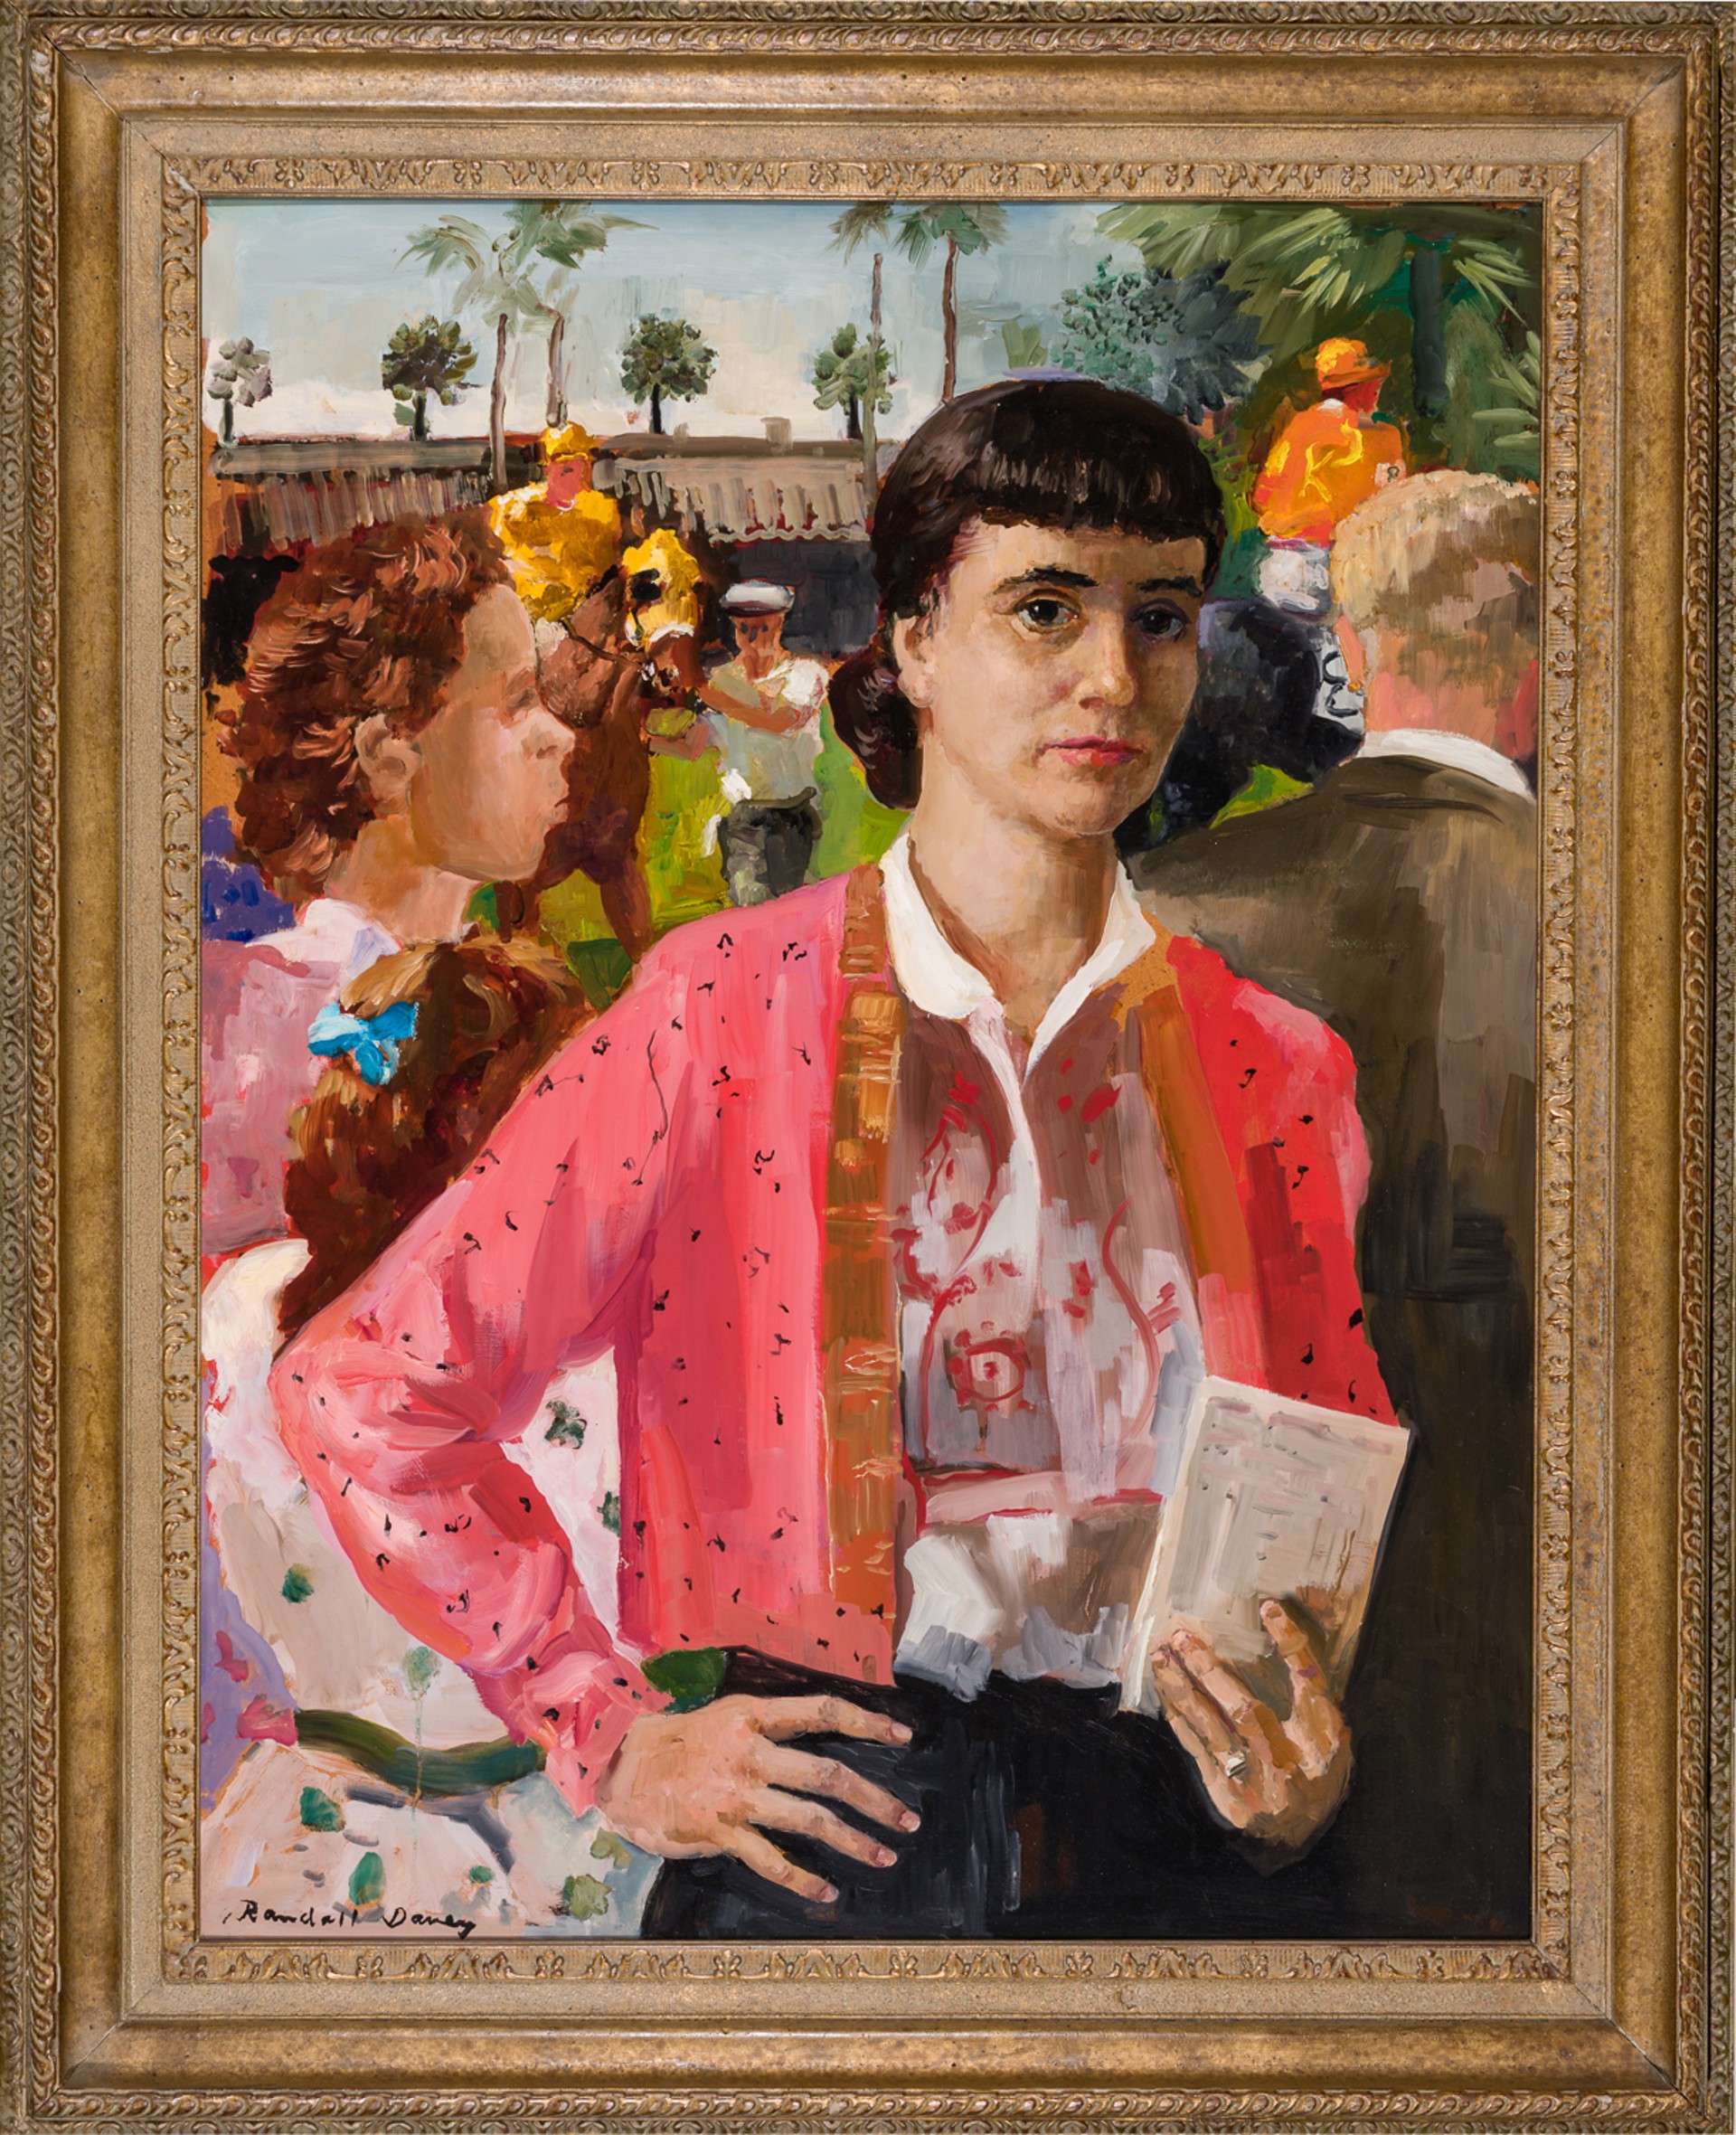 WOMAN AT THE RACES by Randall Davey